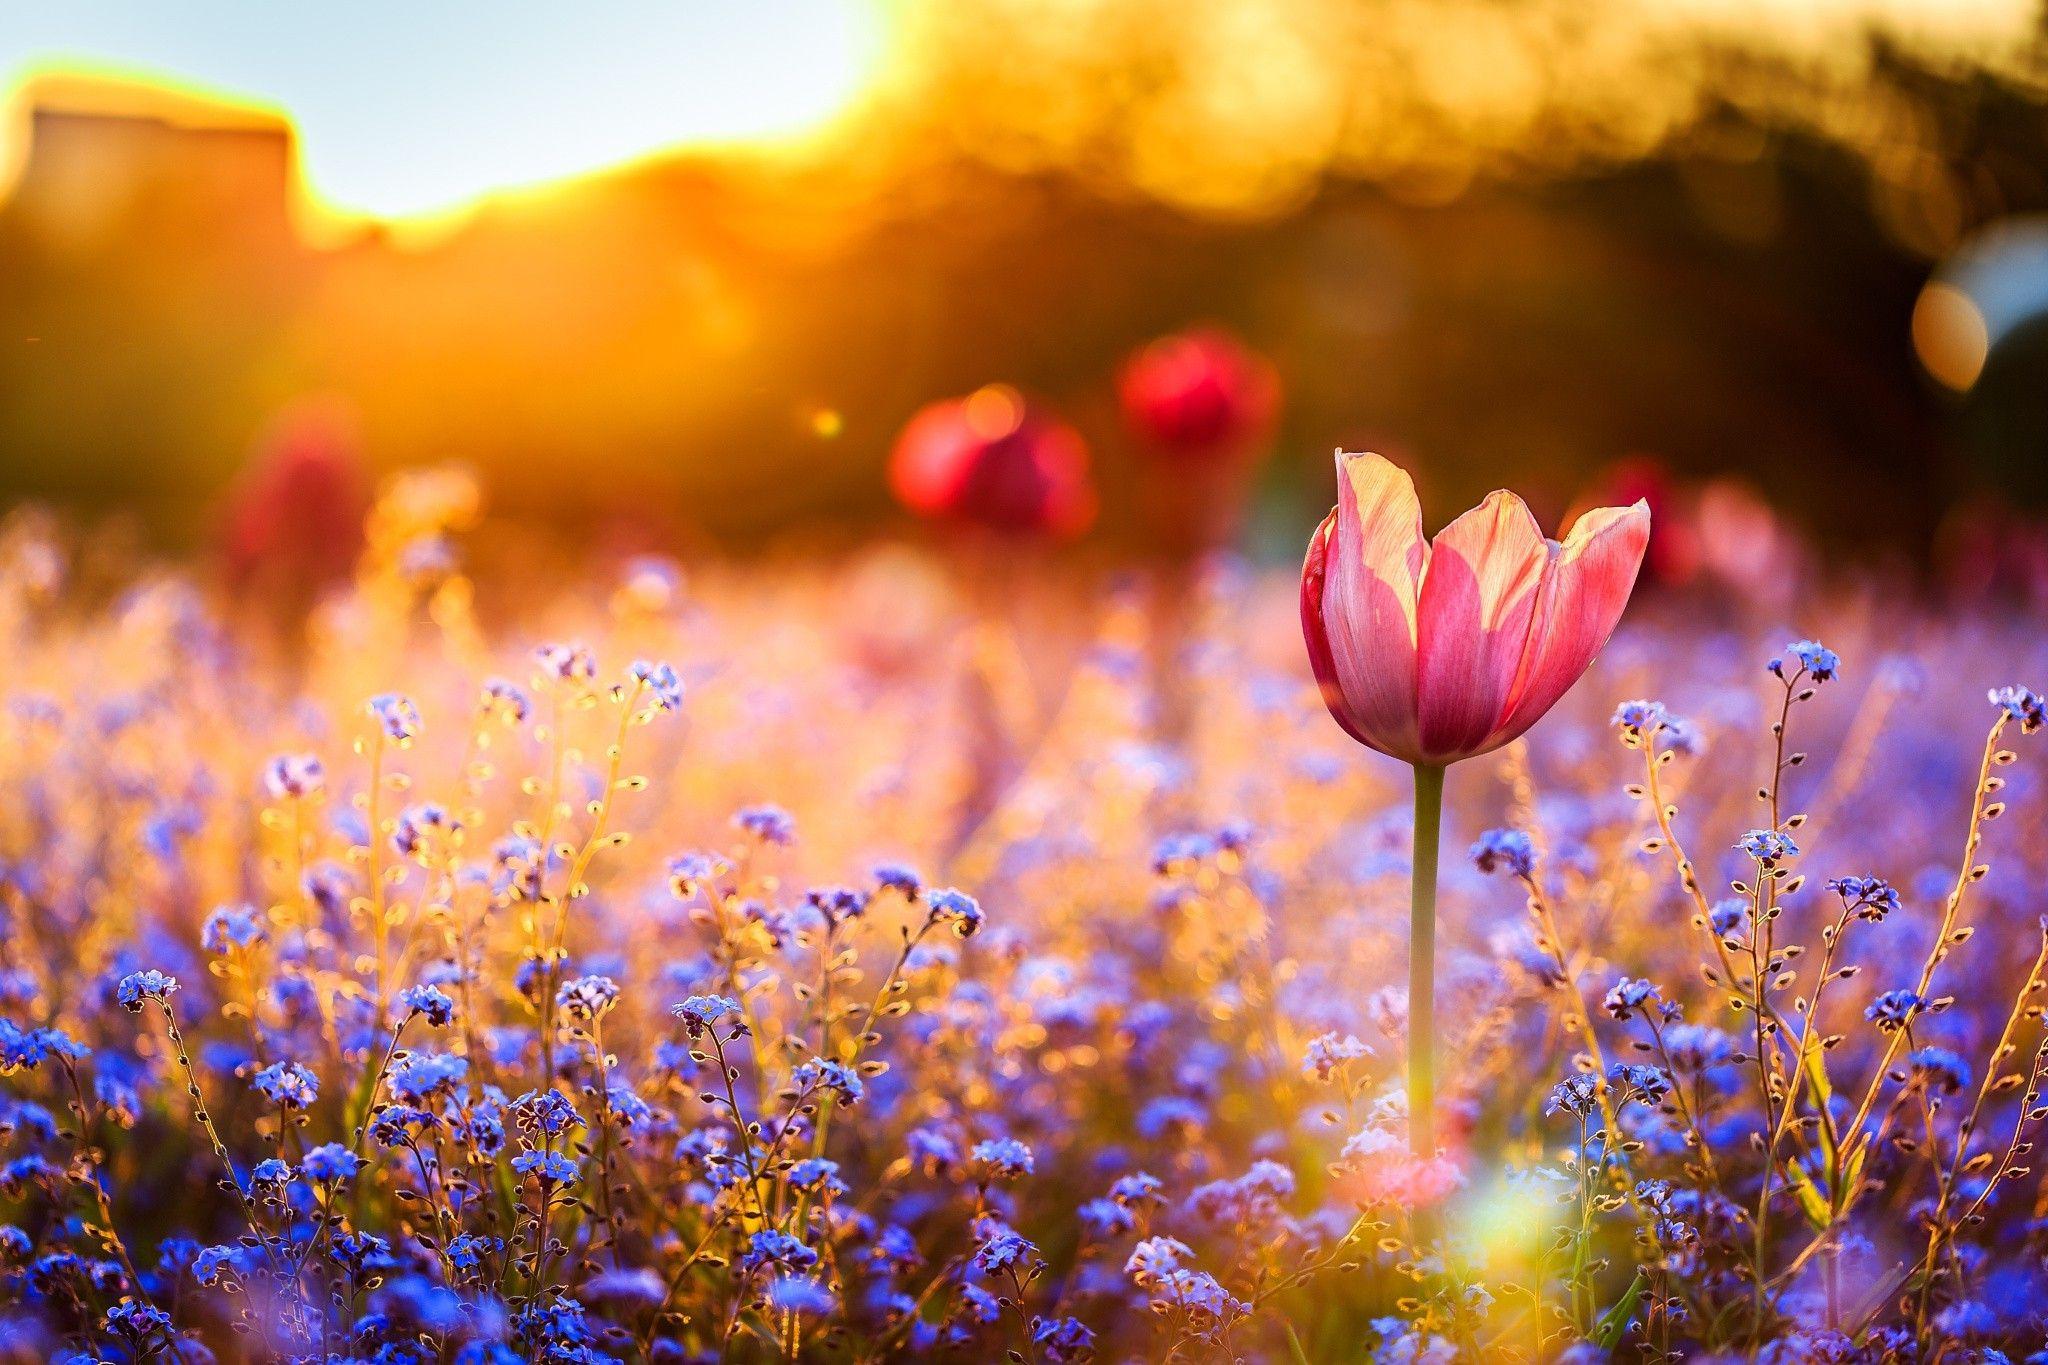 Field of Flowers Wallpapers - Top Free Field of Flowers Backgrounds